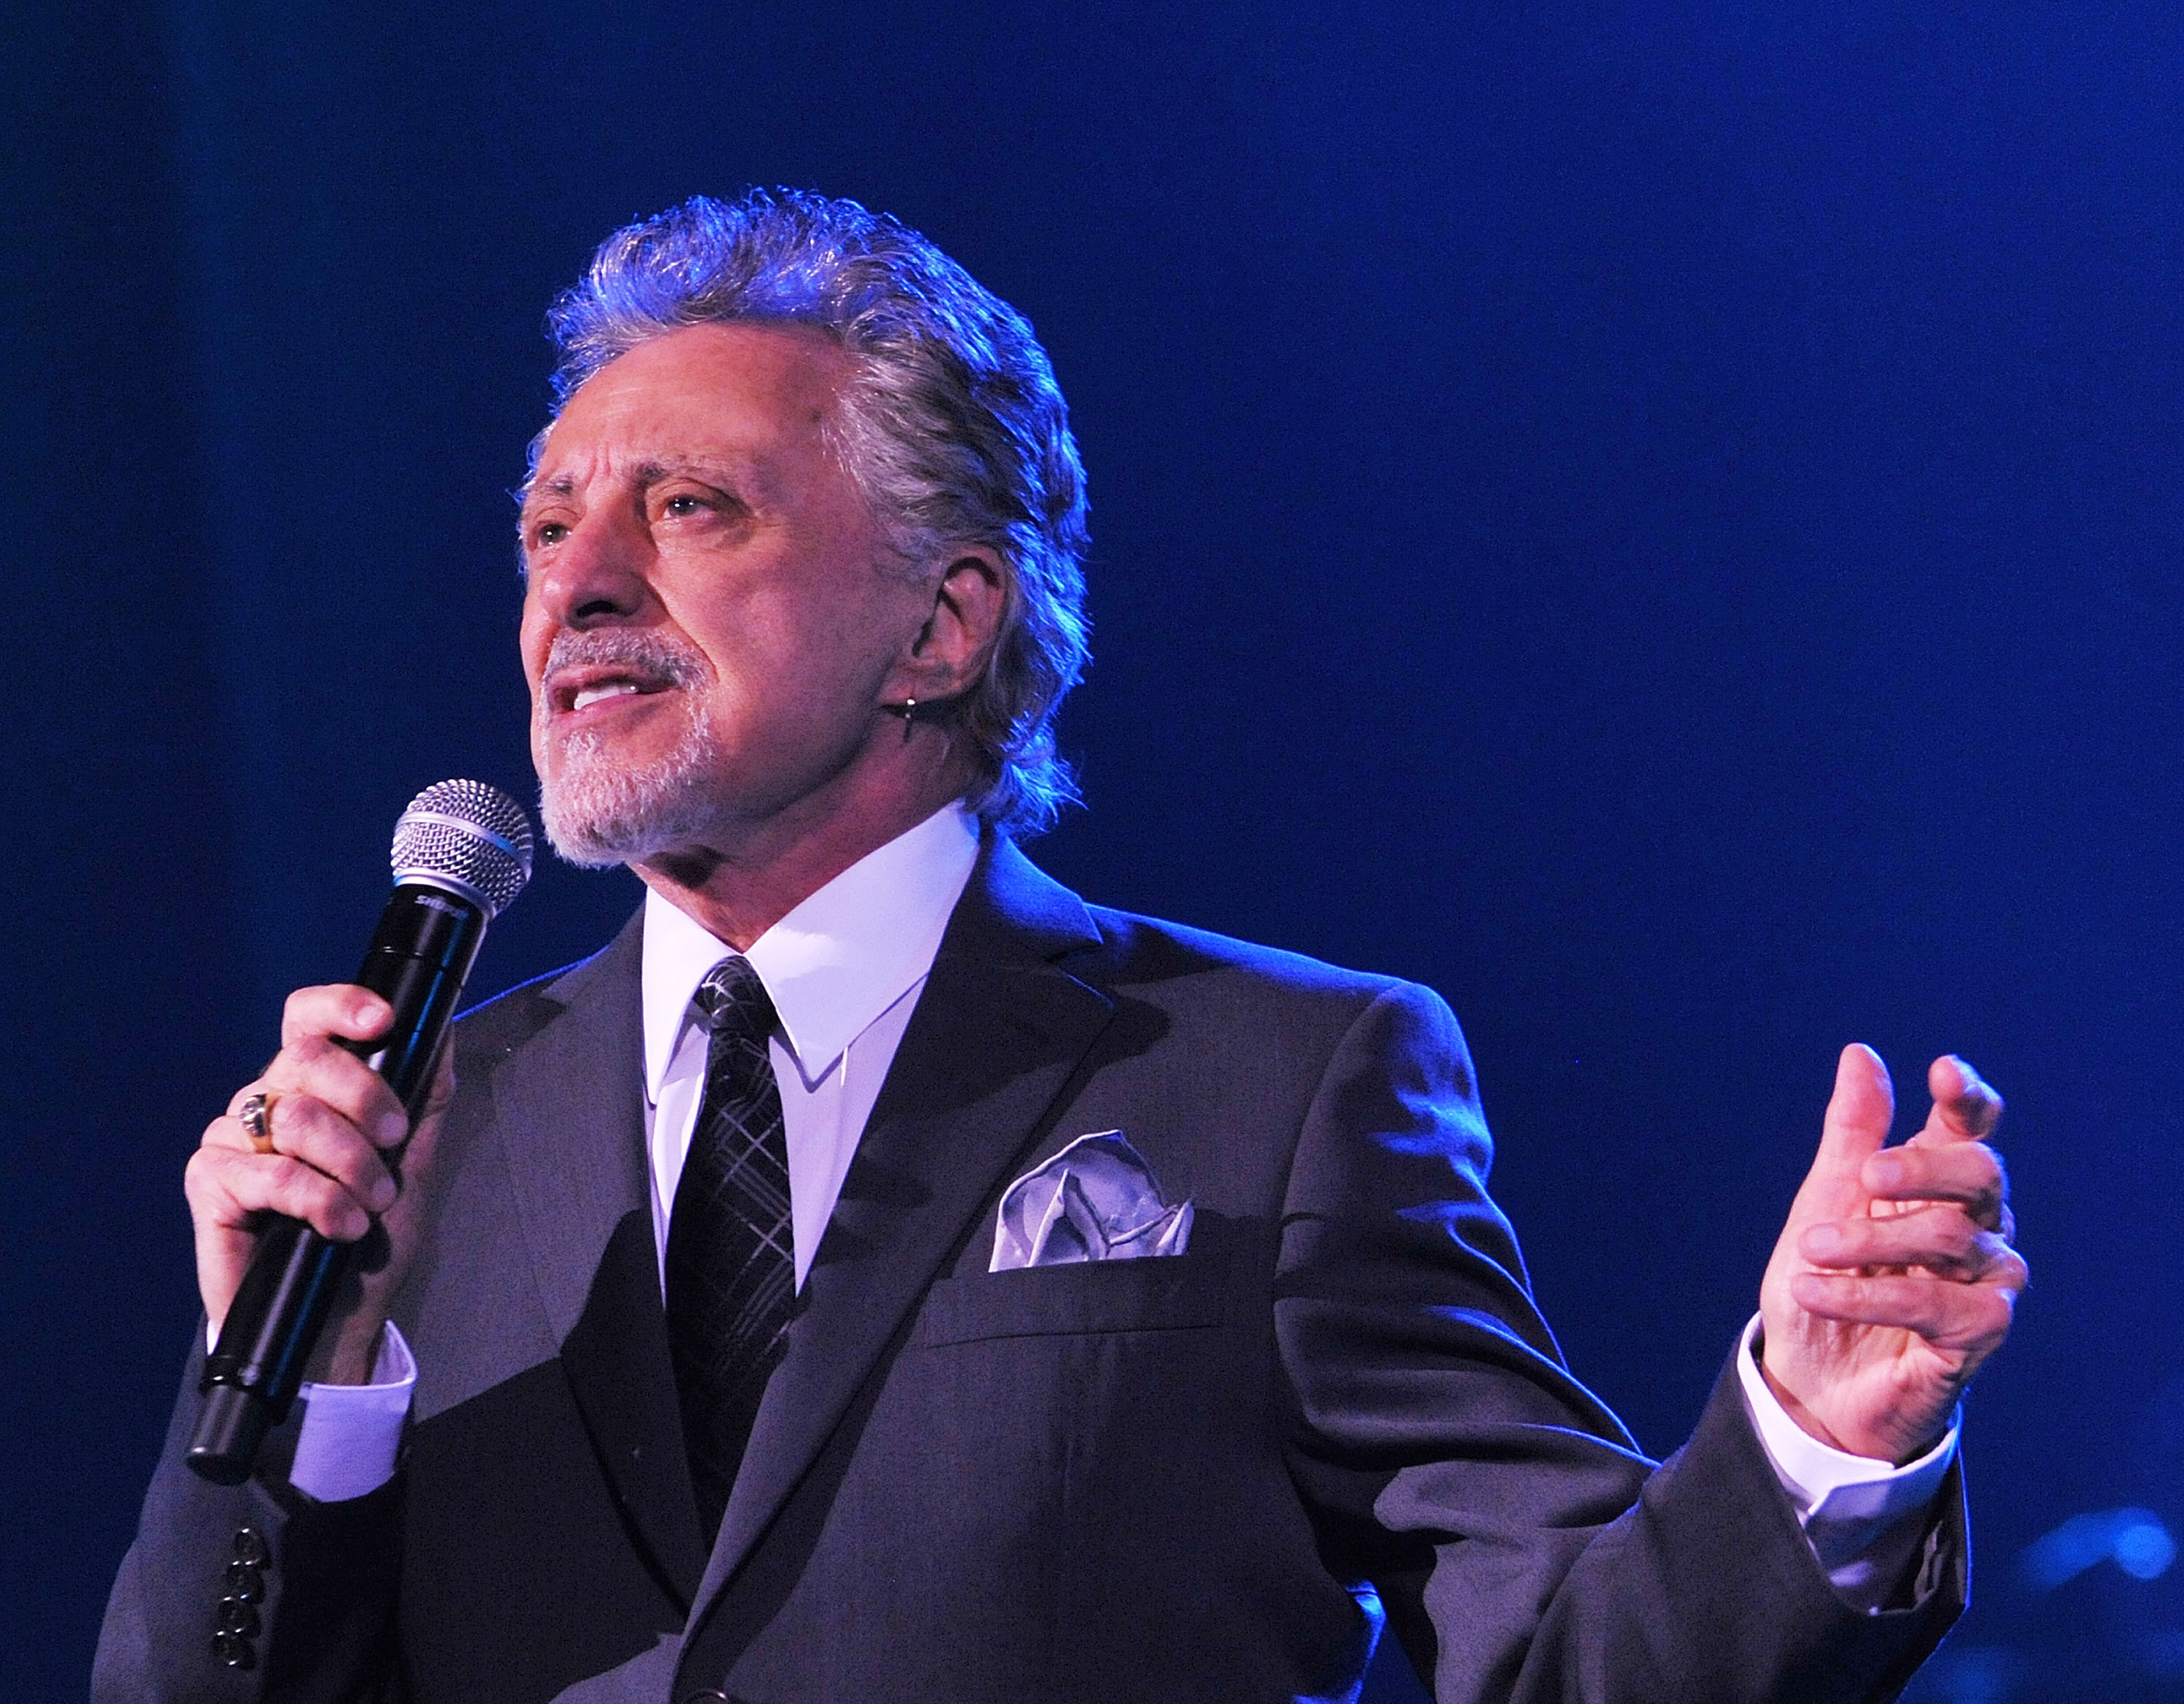 Frankie Valli performs at the Paramount Theatre on May 29, 2010, in Asbury Park, New Jersey | Source: Getty Images